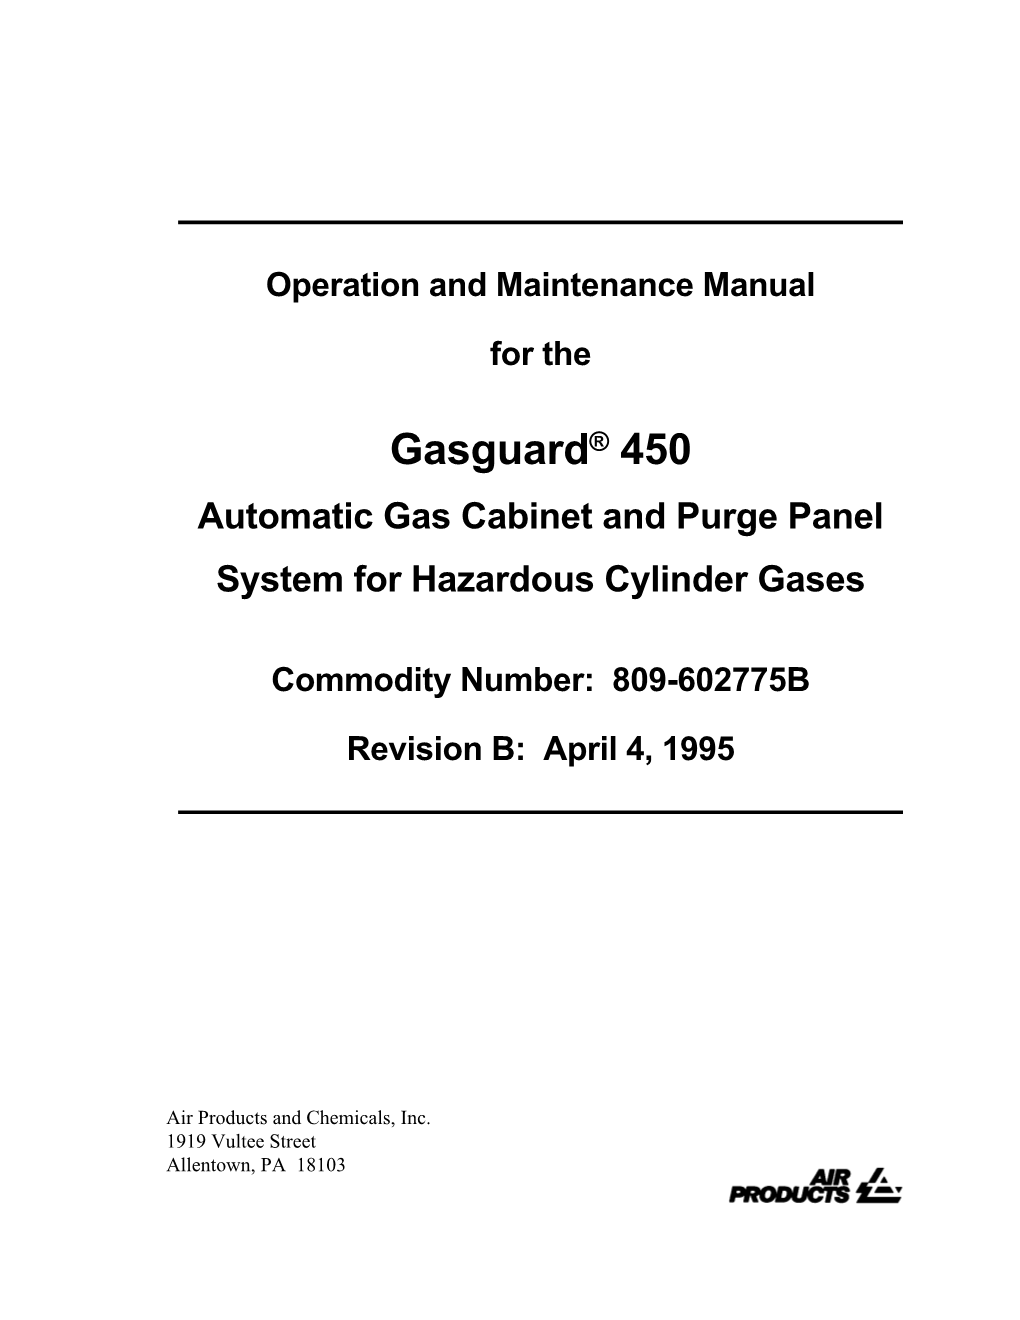 Gasguard® 450 Automatic Gas Cabinet and Purge Panel System for Hazardous Cylinder Gases